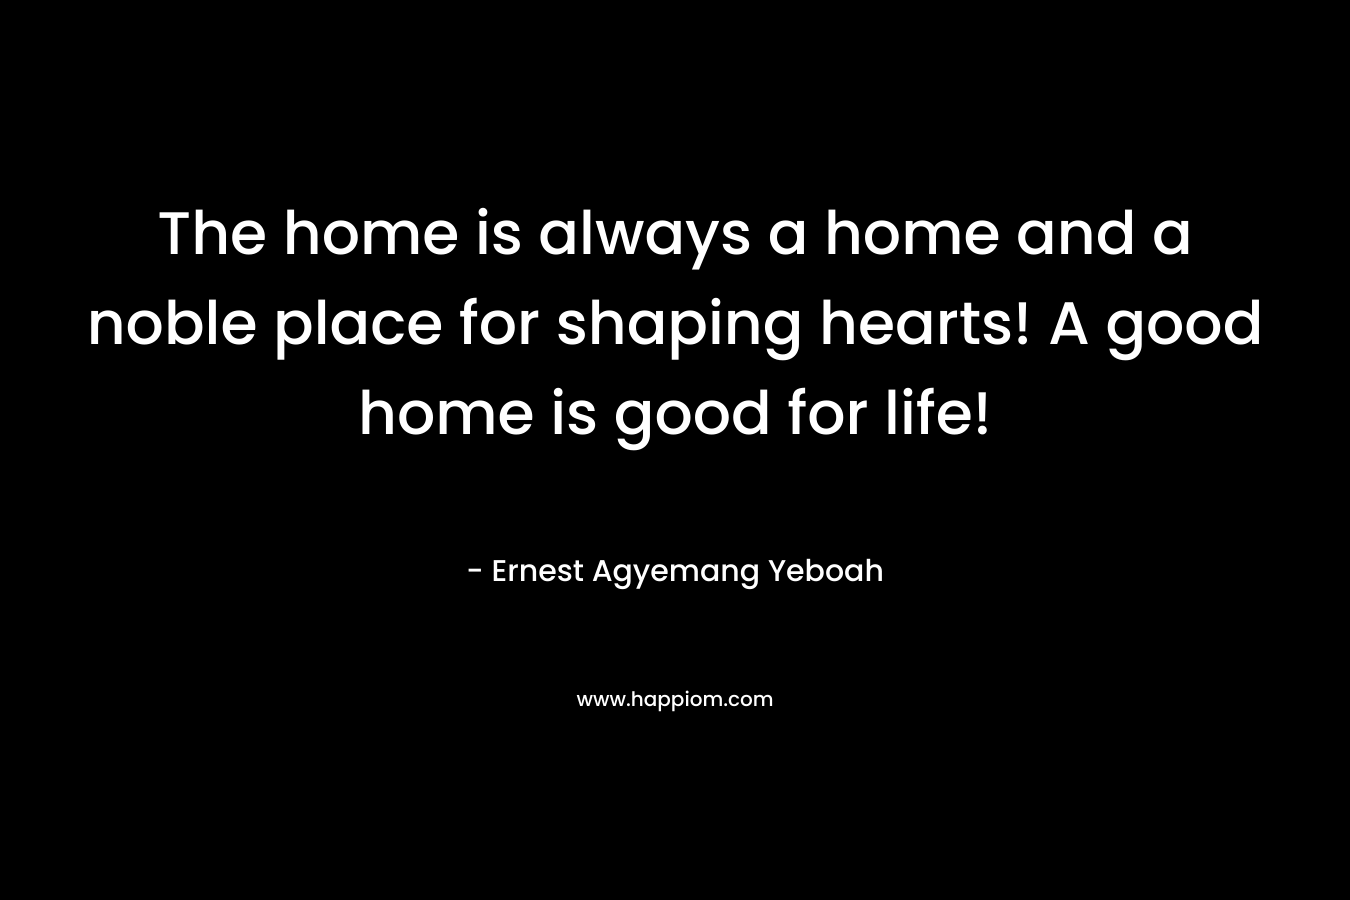 The home is always a home and a noble place for shaping hearts! A good home is good for life!